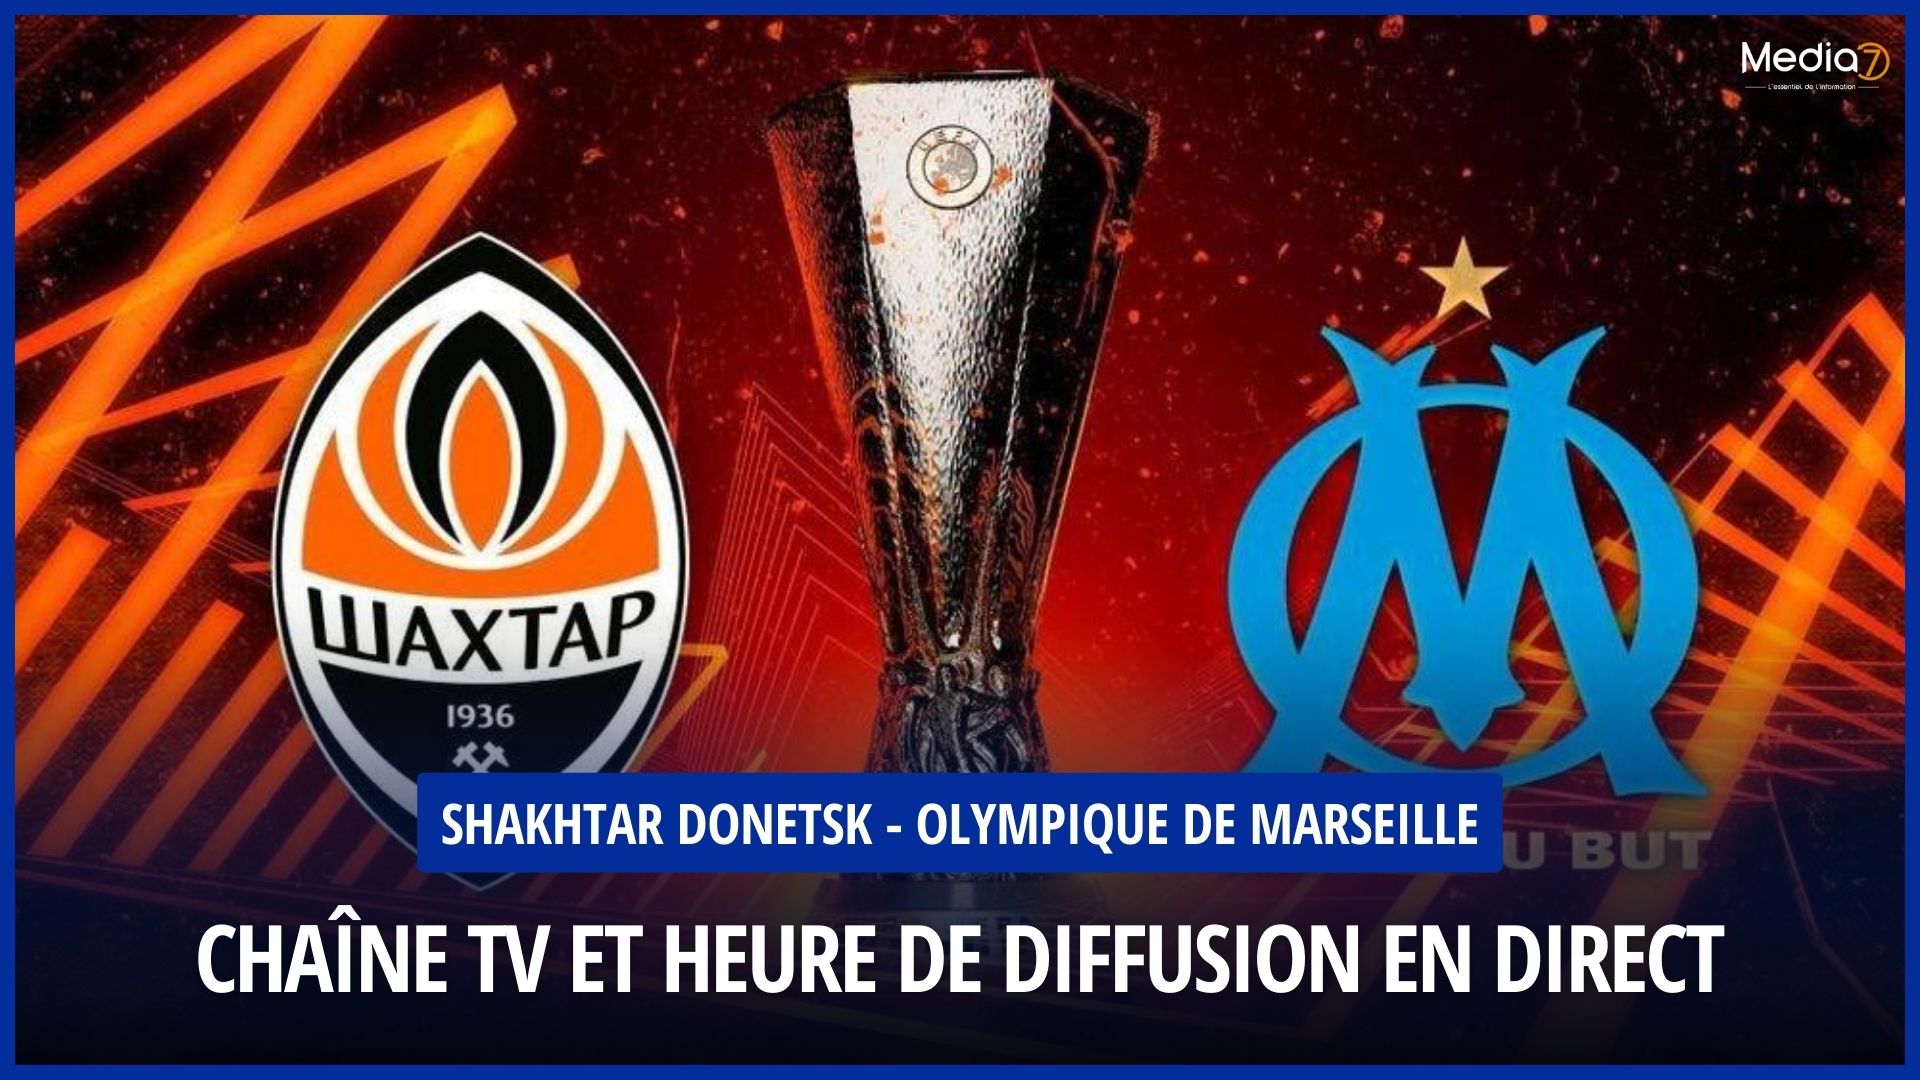 Time and Live Broadcast Channels of the Shakhtar Donetsk - Olympique de Marseille Match - Media7